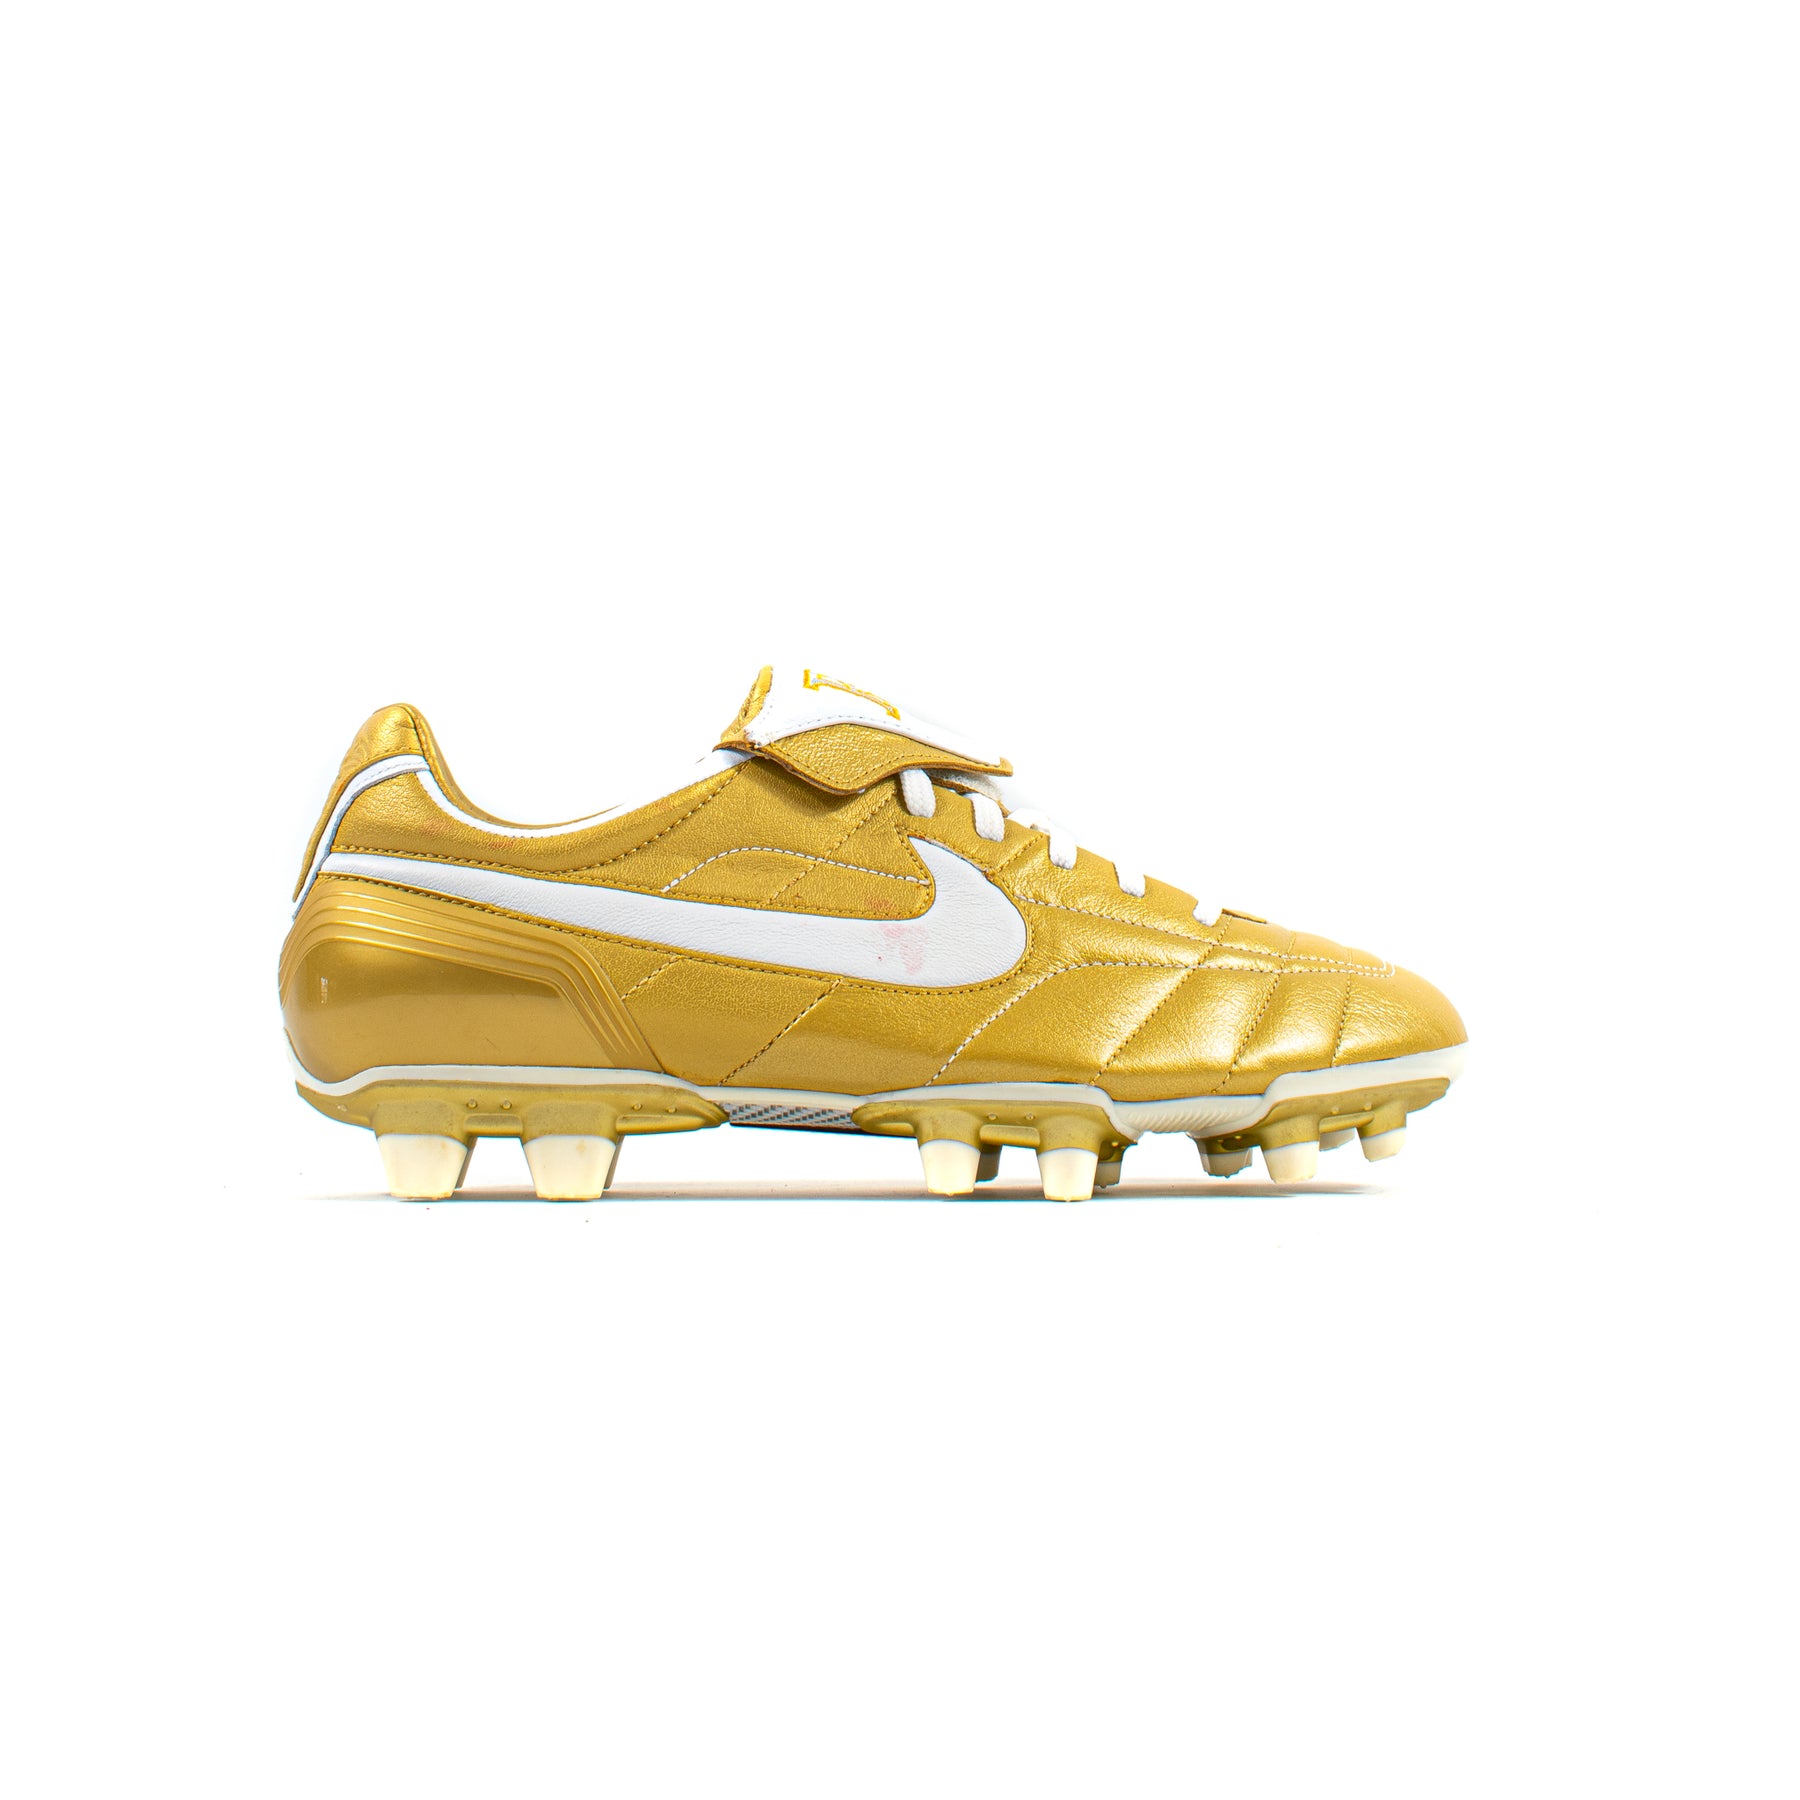 Nike Tiempo Air R10 FG – Classic Soccer Cleats